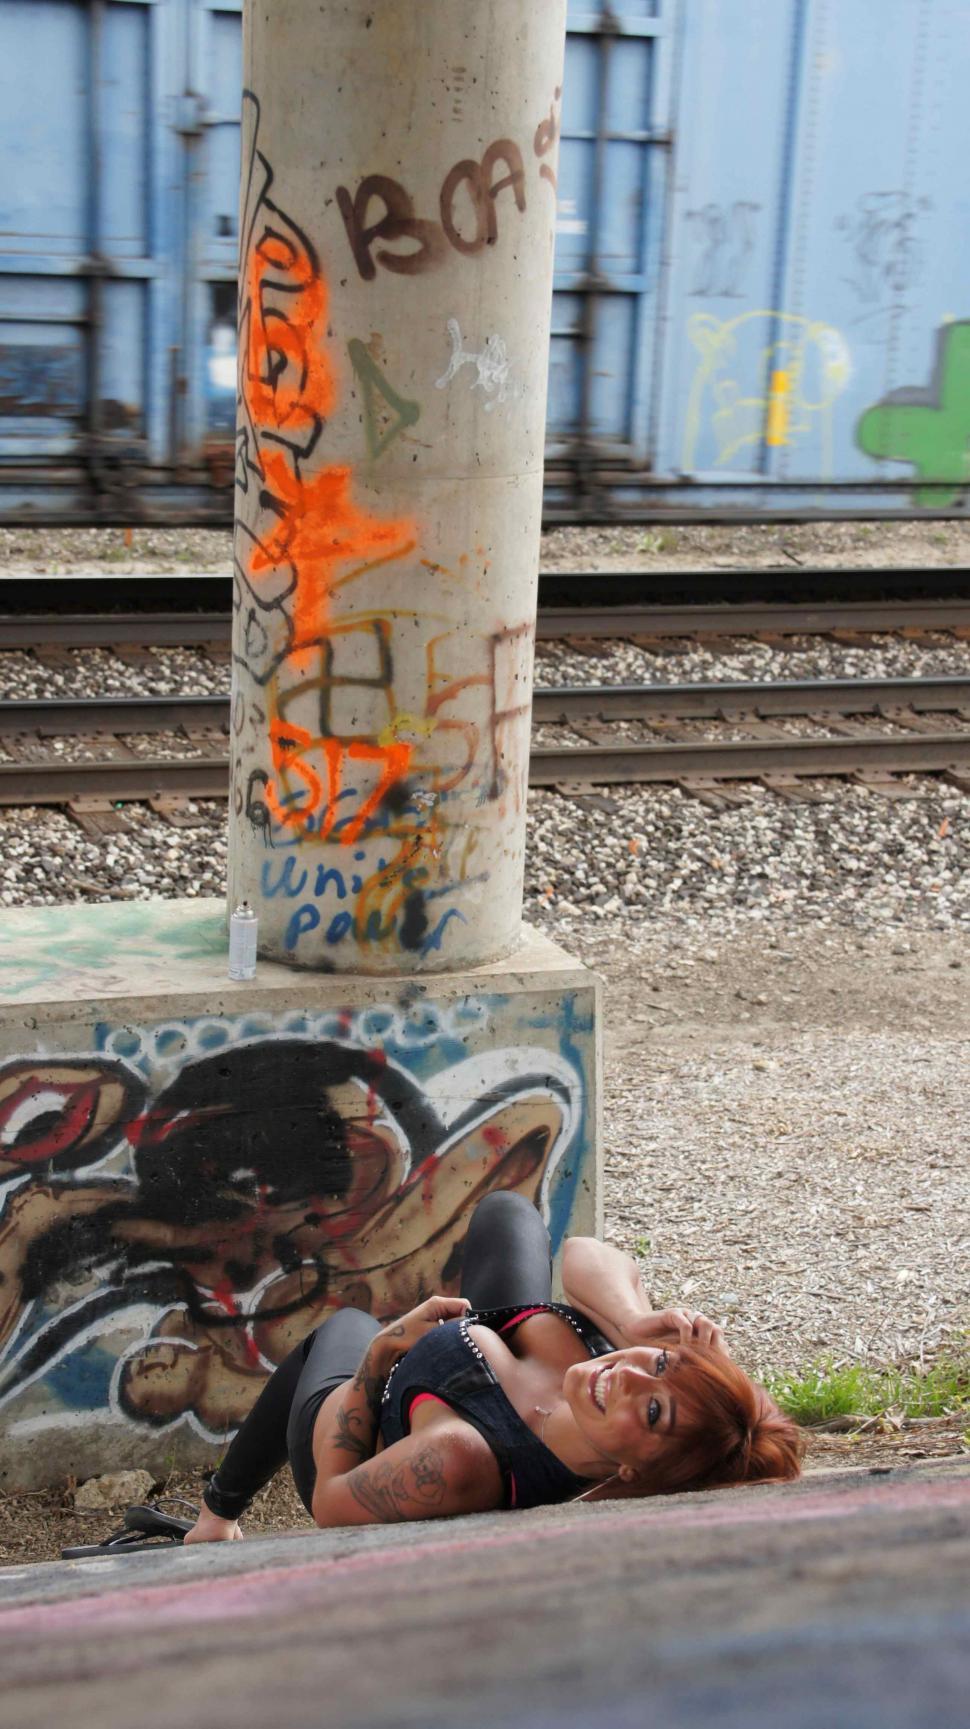 Free Image of Woman with Tattoos Poses with Graffiti 